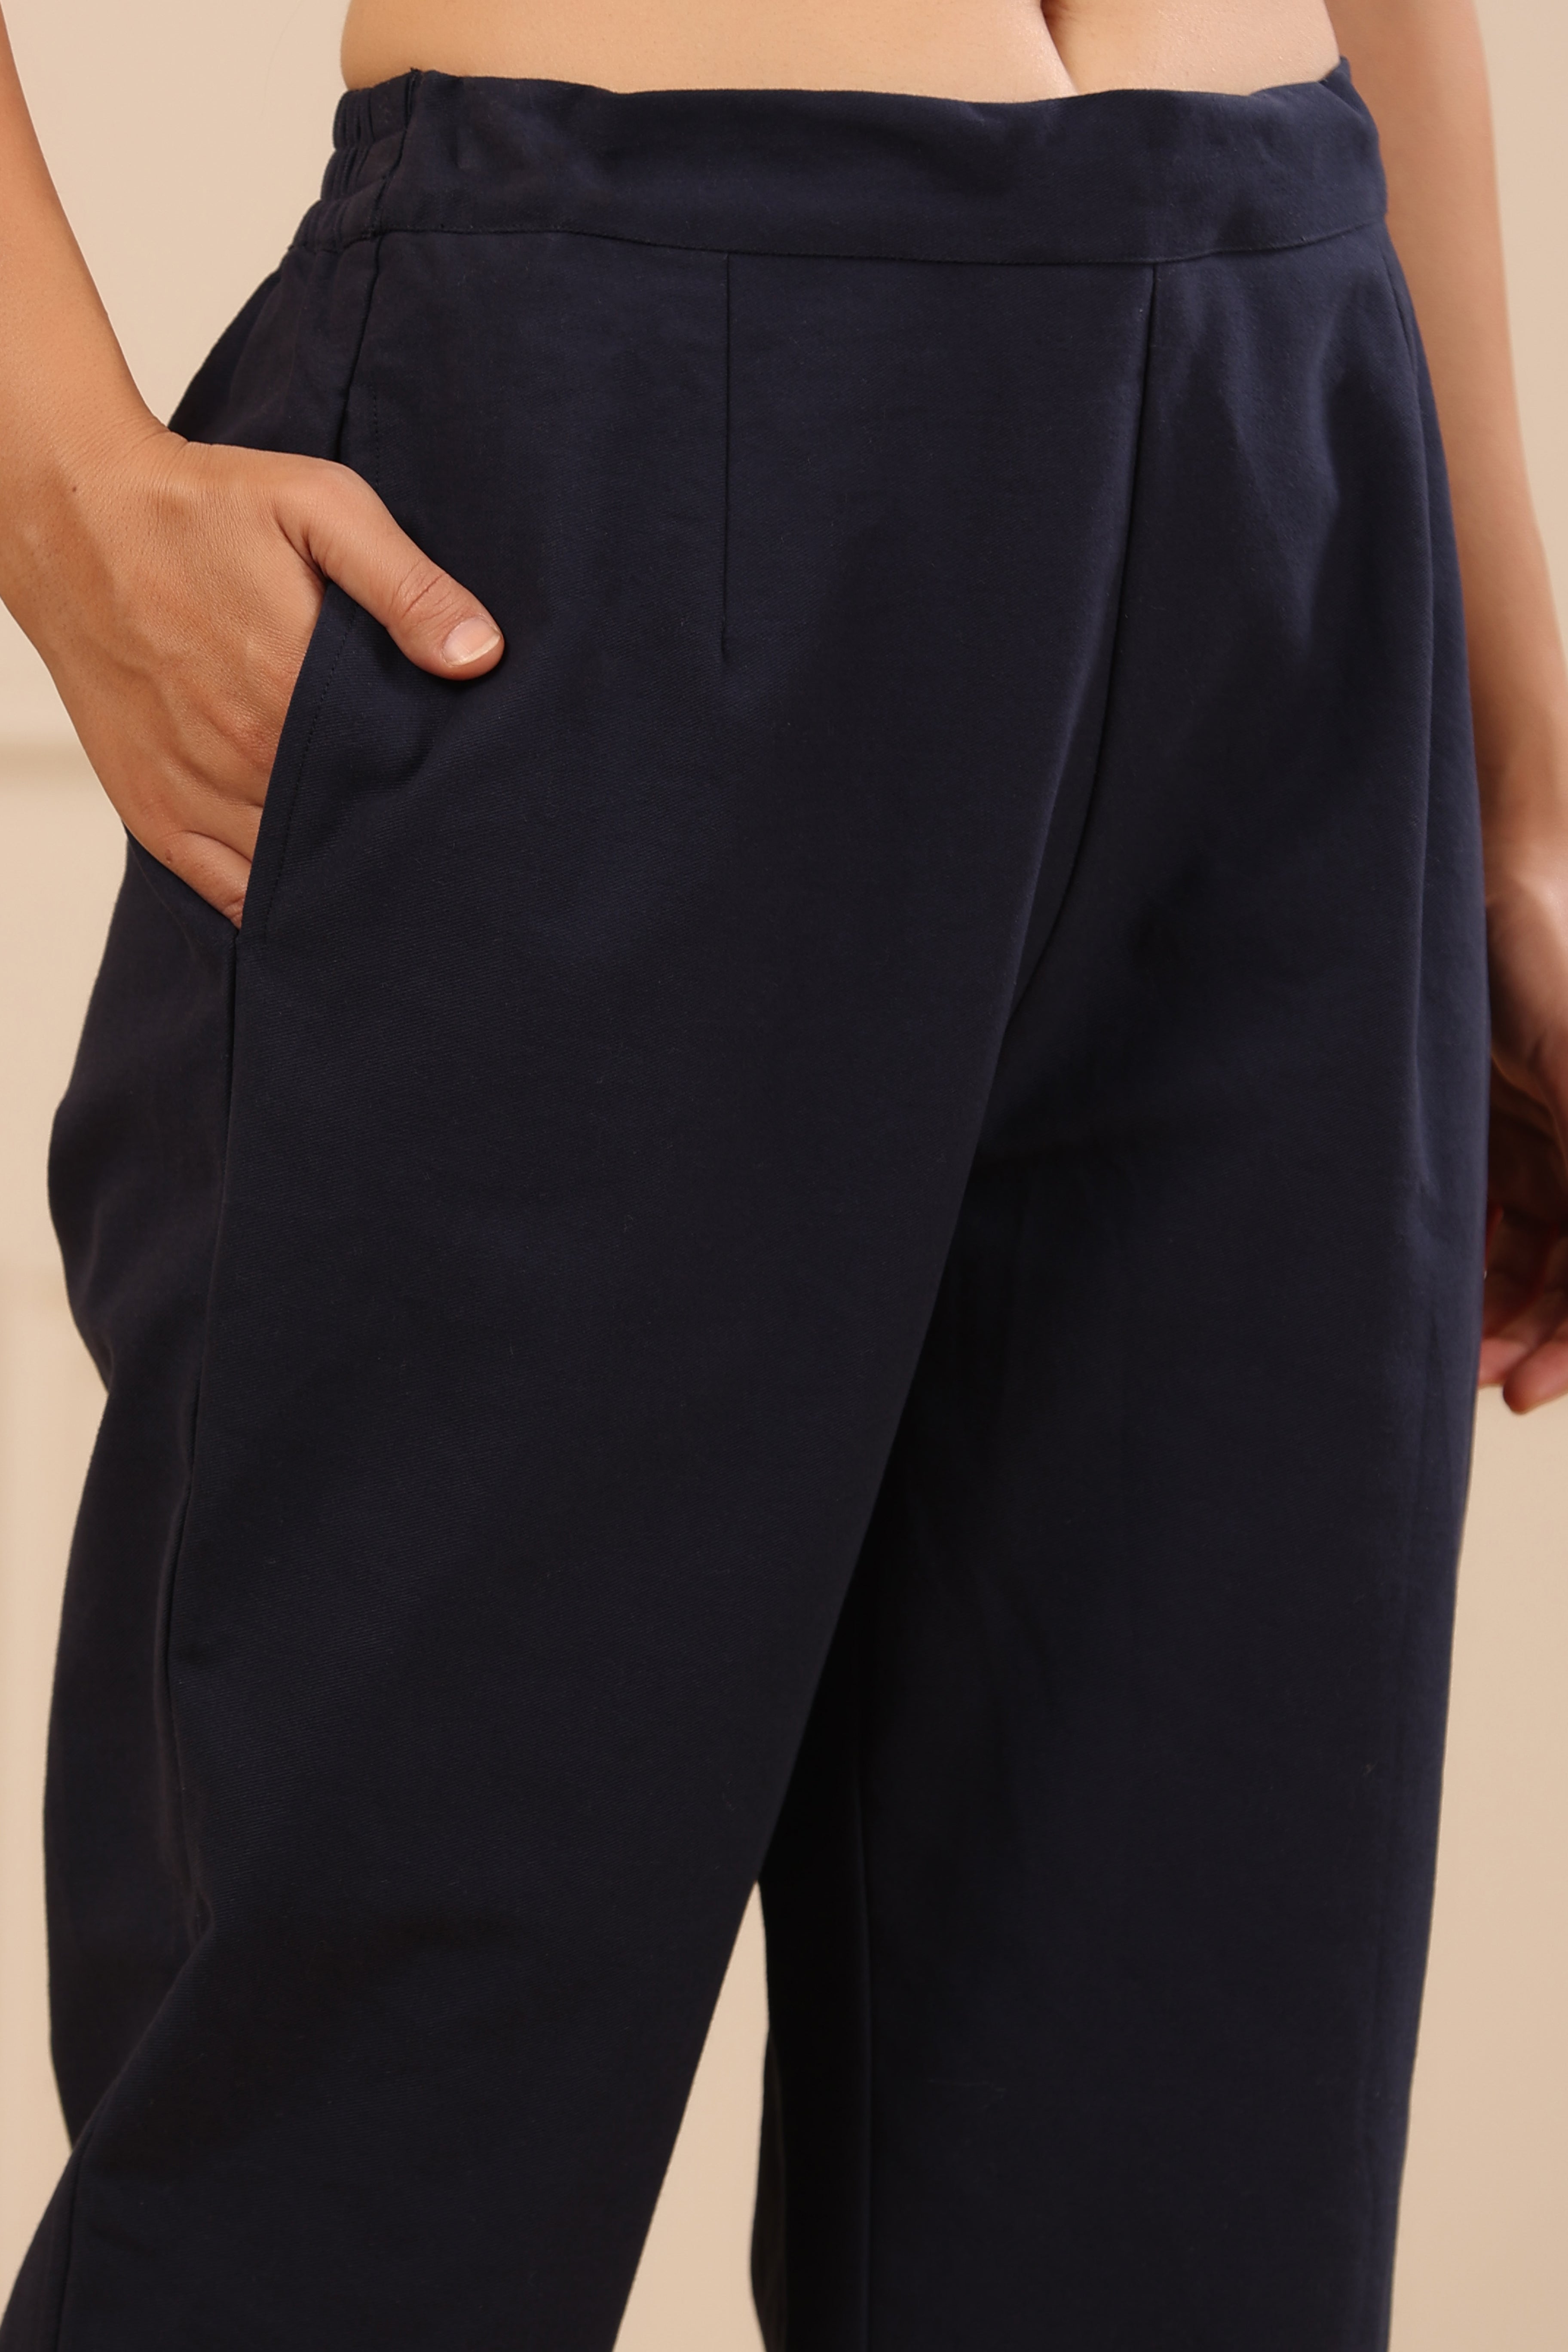 Juniper Navy Blue Cotton Solid Slim Fit Pants With Partially Elasticated Waistband